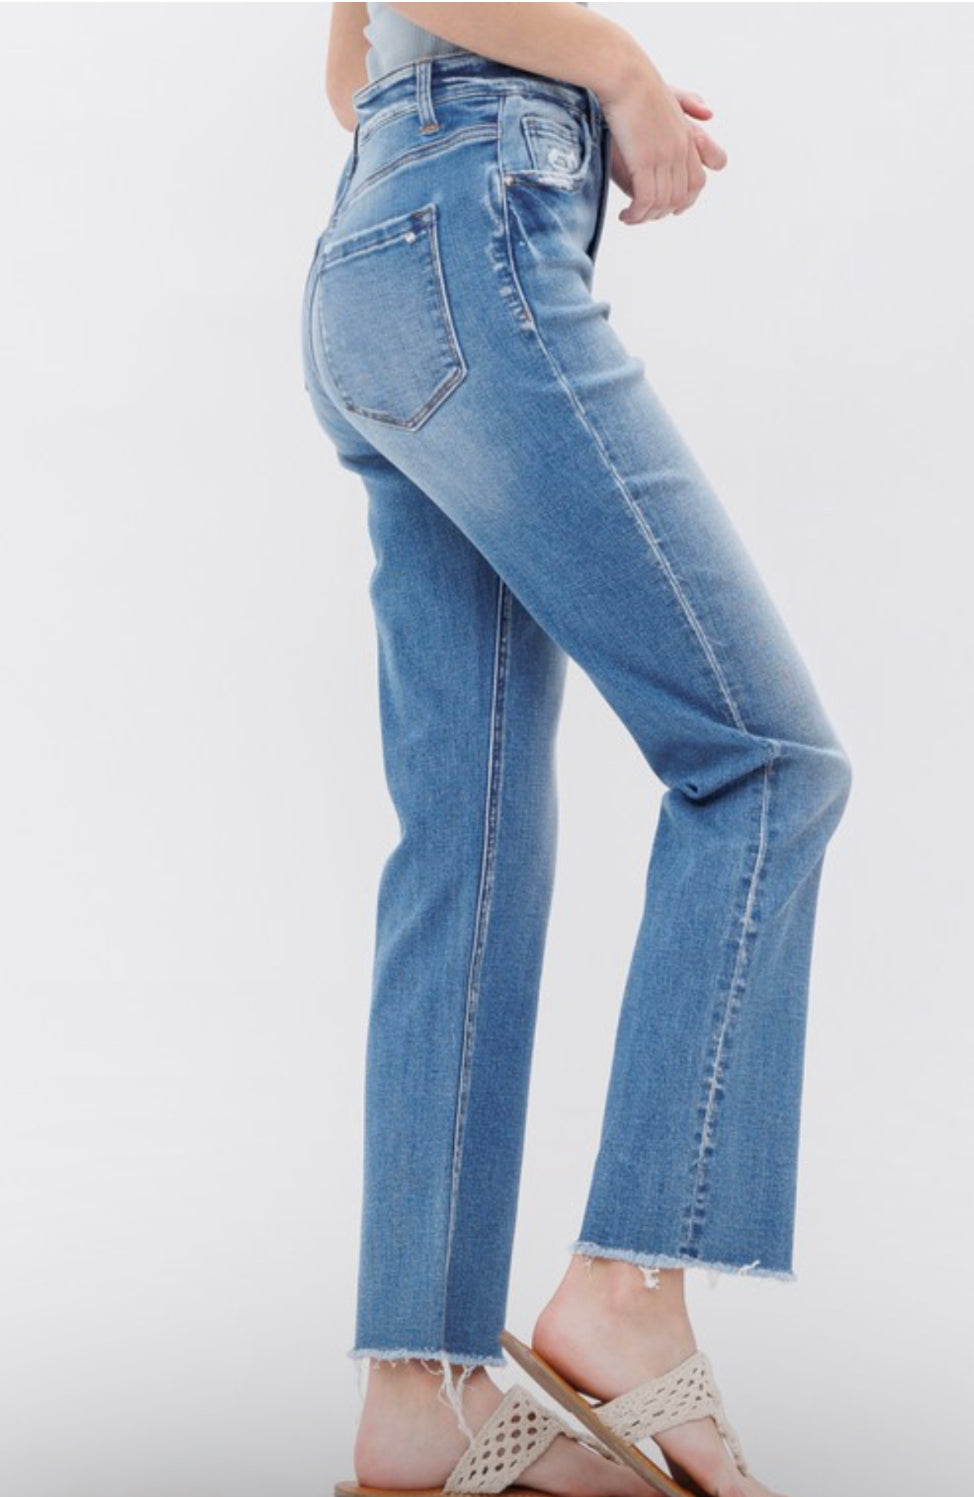 HIGH RISE JEANS - Style by me